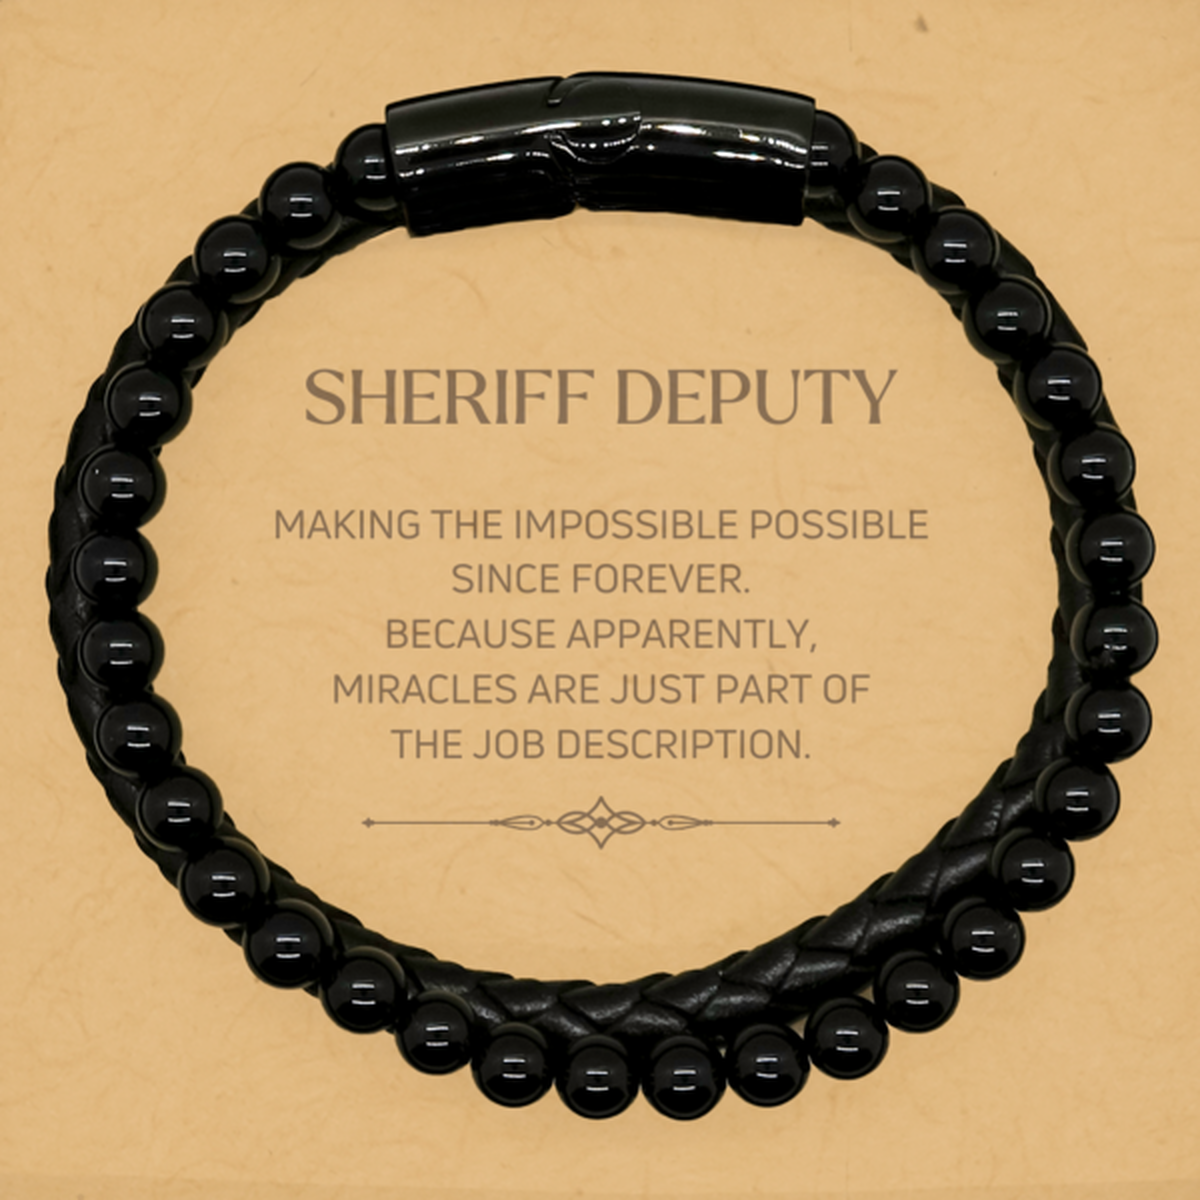 Funny Sheriff Deputy Gifts, Miracles are just part of the job description, Inspirational Birthday Stone Leather Bracelets For Sheriff Deputy, Men, Women, Coworkers, Friends, Boss